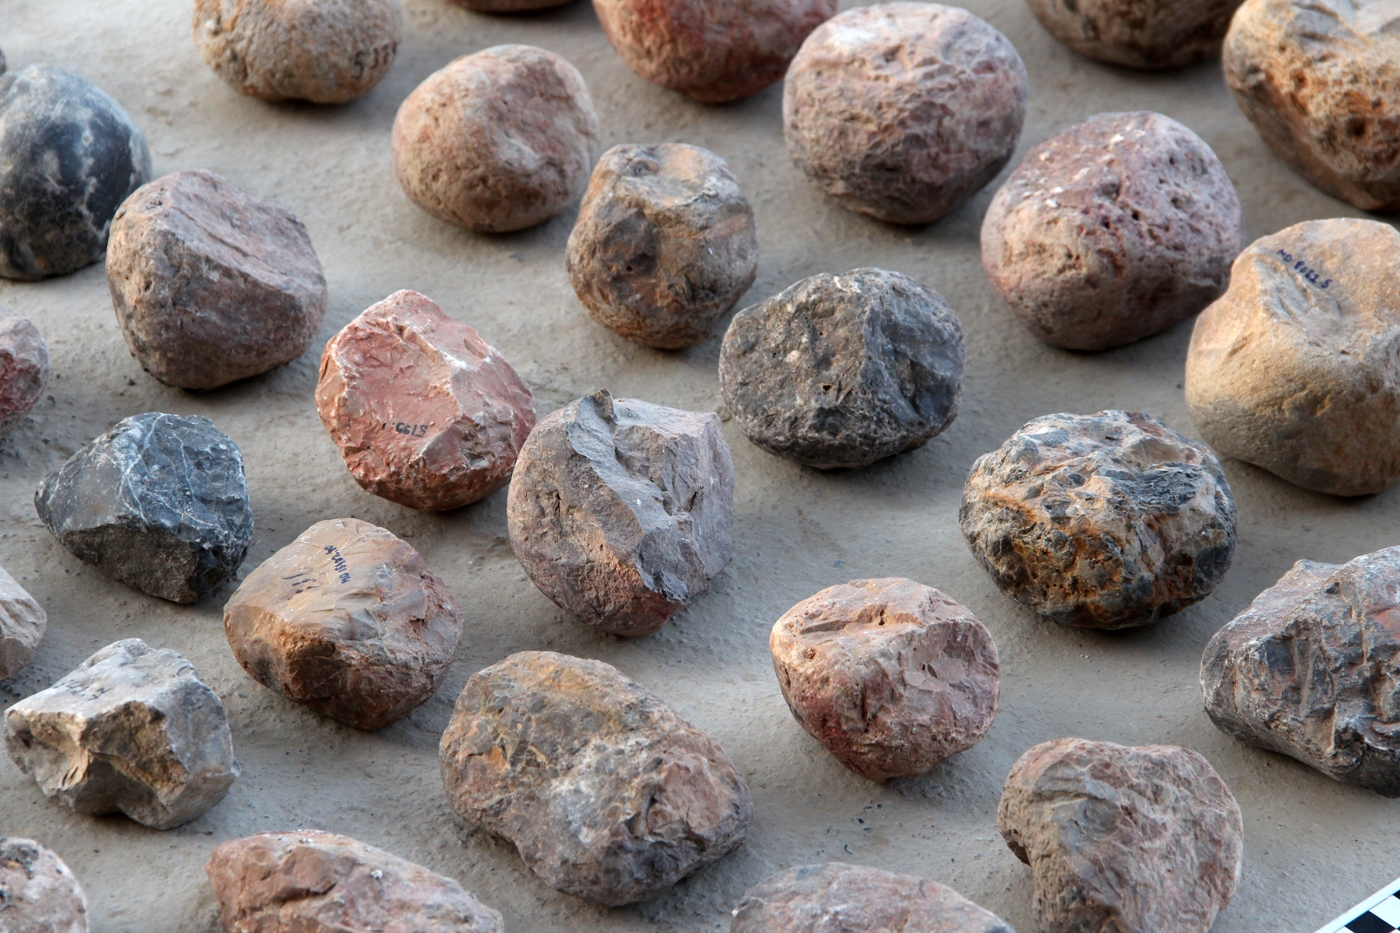 An array of hammerstones made of different materials